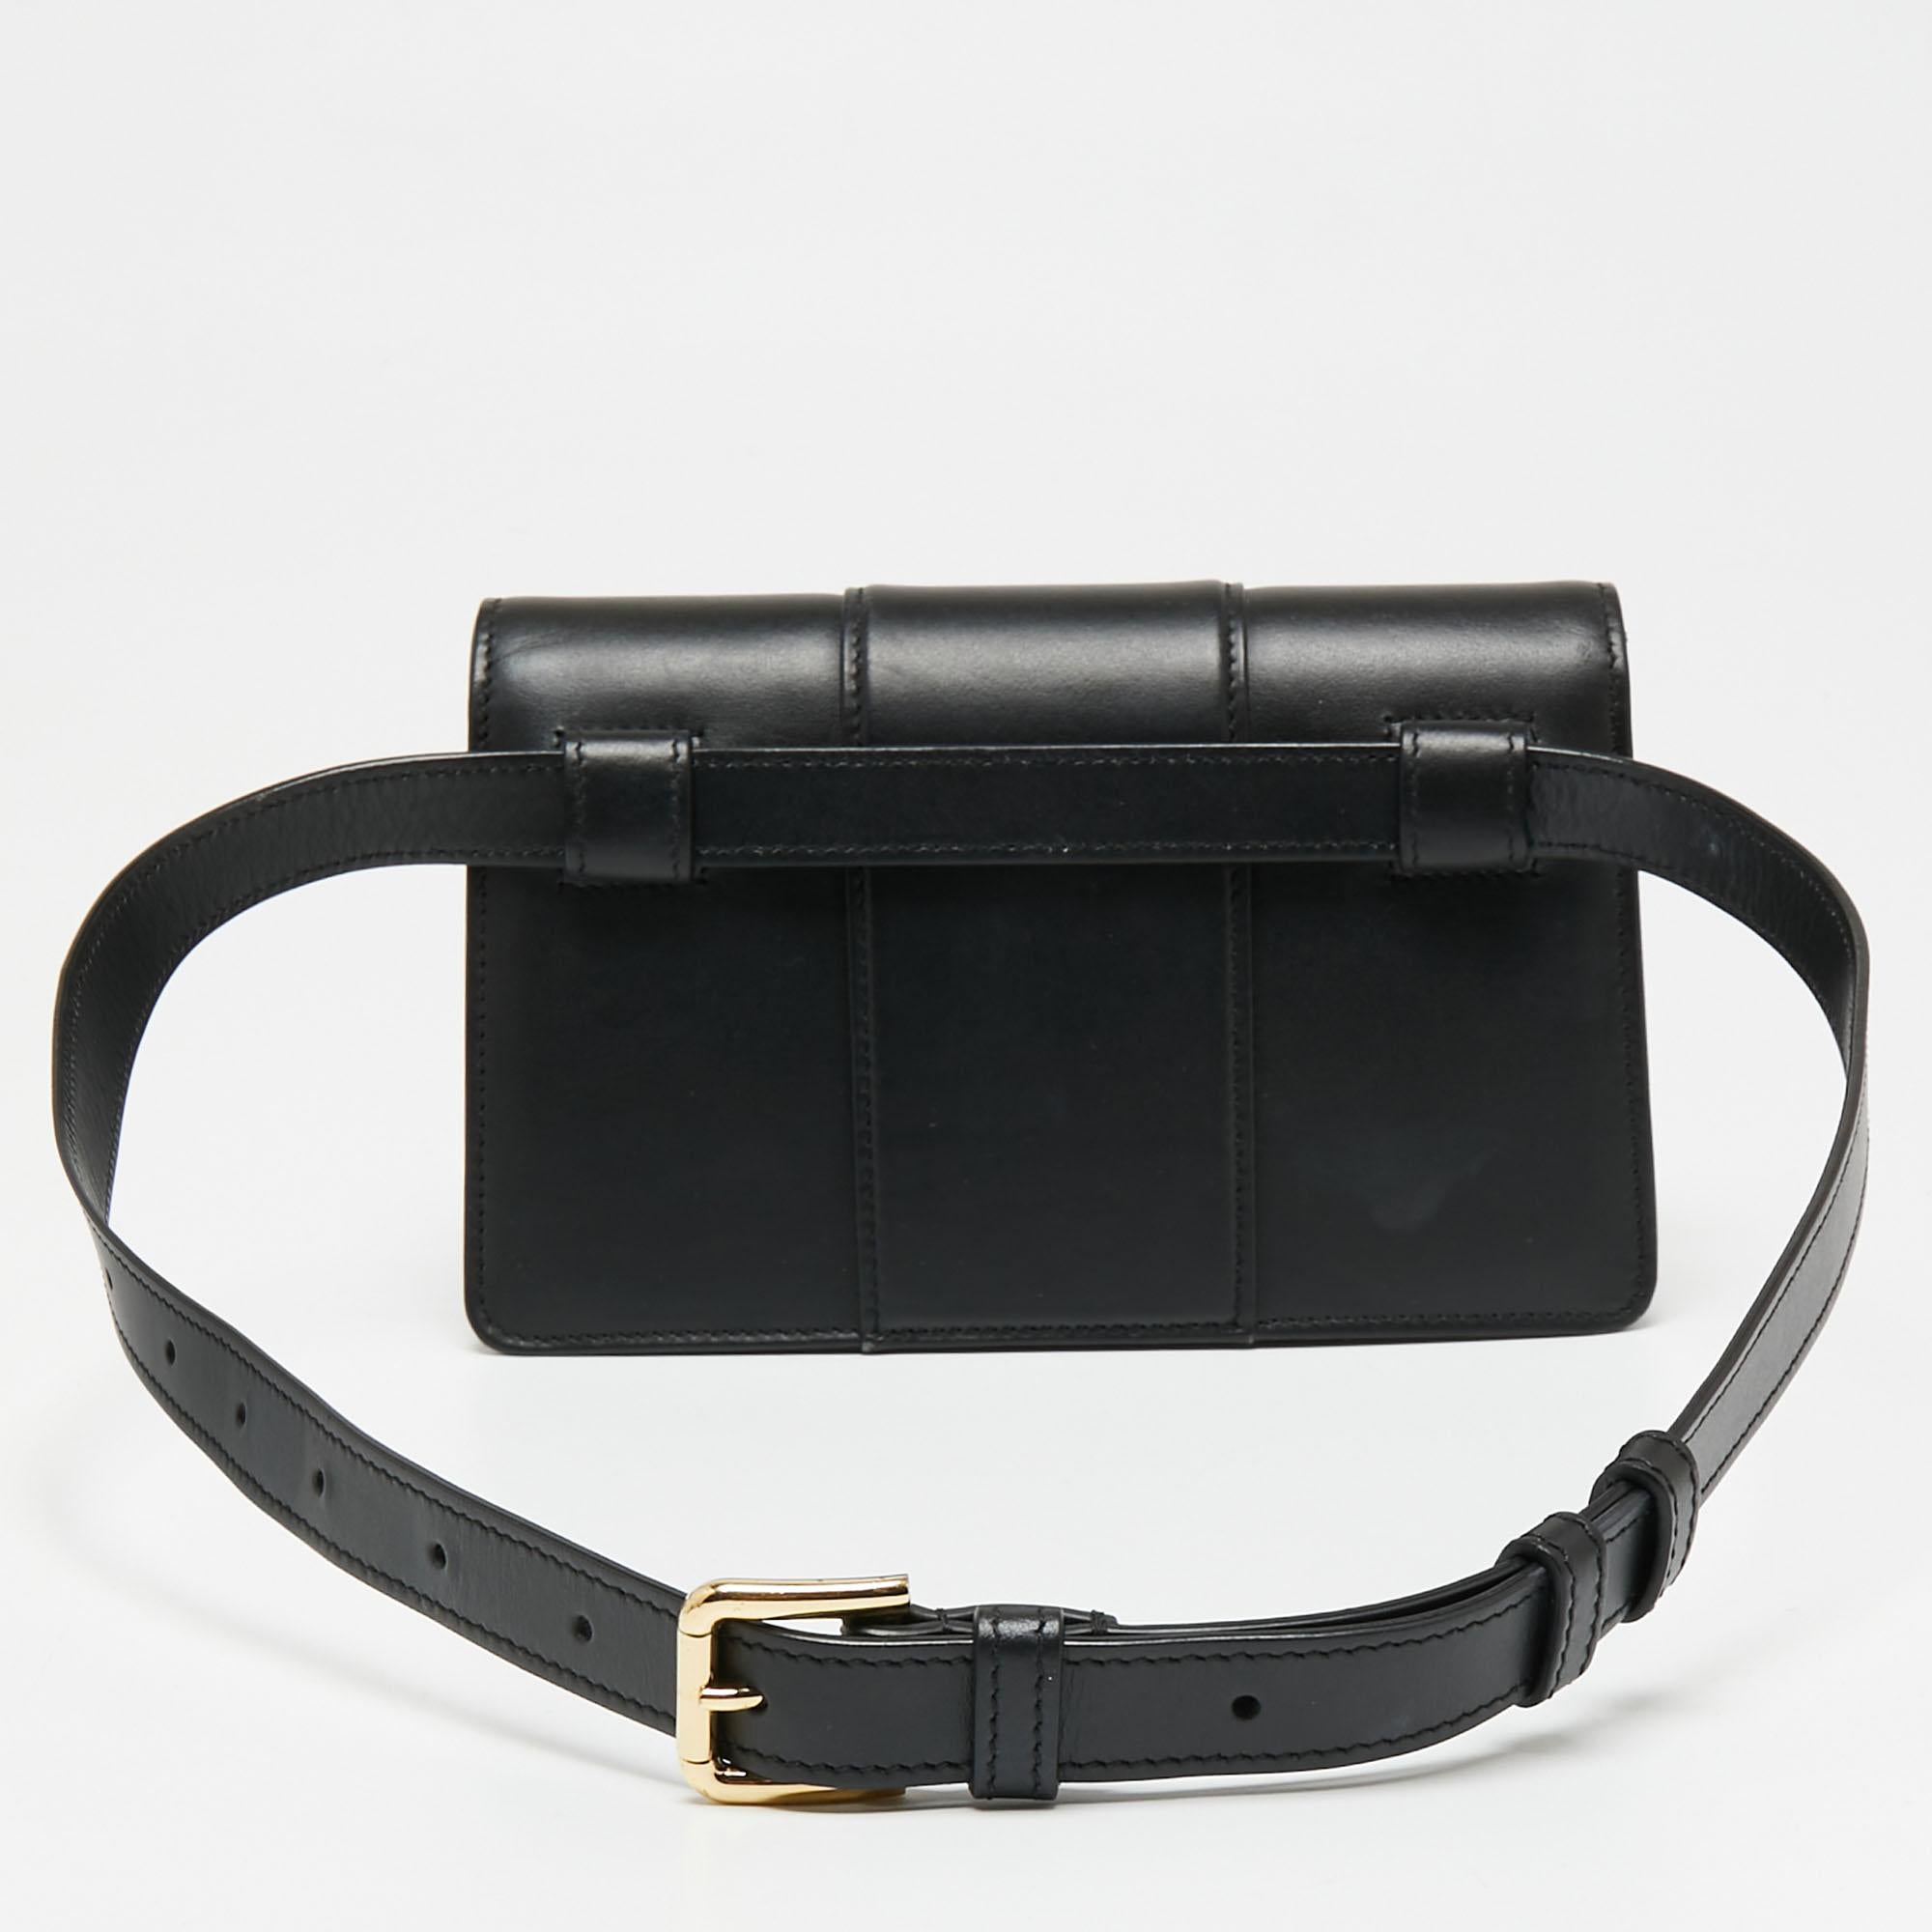 For days when you need just essentials, carry this uber-chic Dolce & Gabbana belt bag. It has been expertly crafted from durable leather in a structured silhouette. It comes with a DG metal detailing on the front flap and has a well-sized